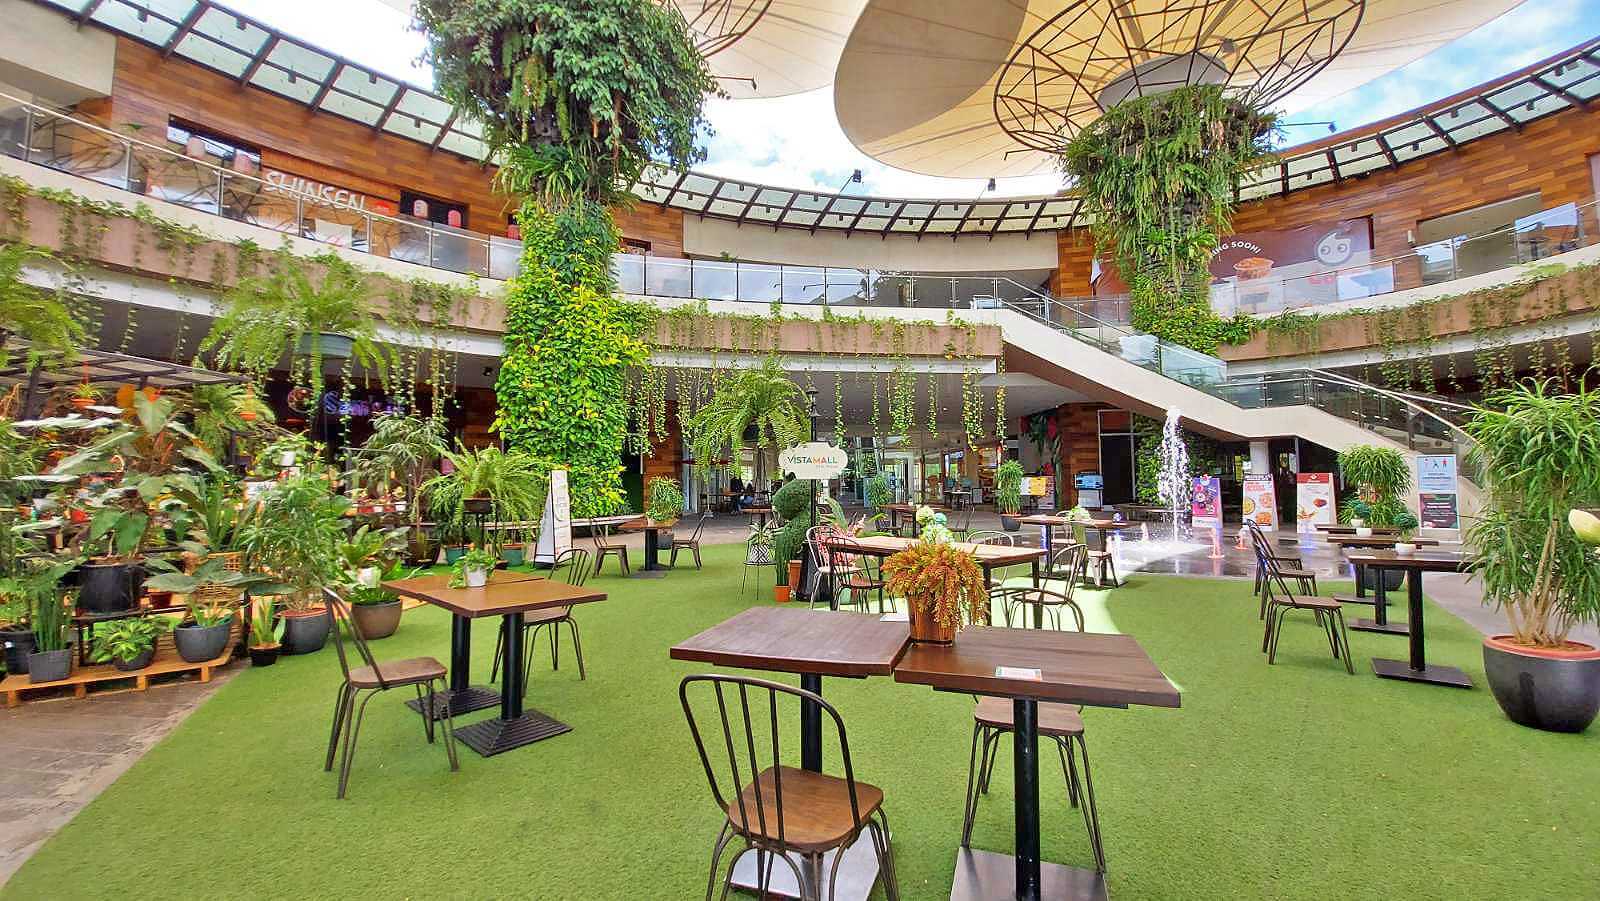 Dine without worries at Vista Mall Outdoor!